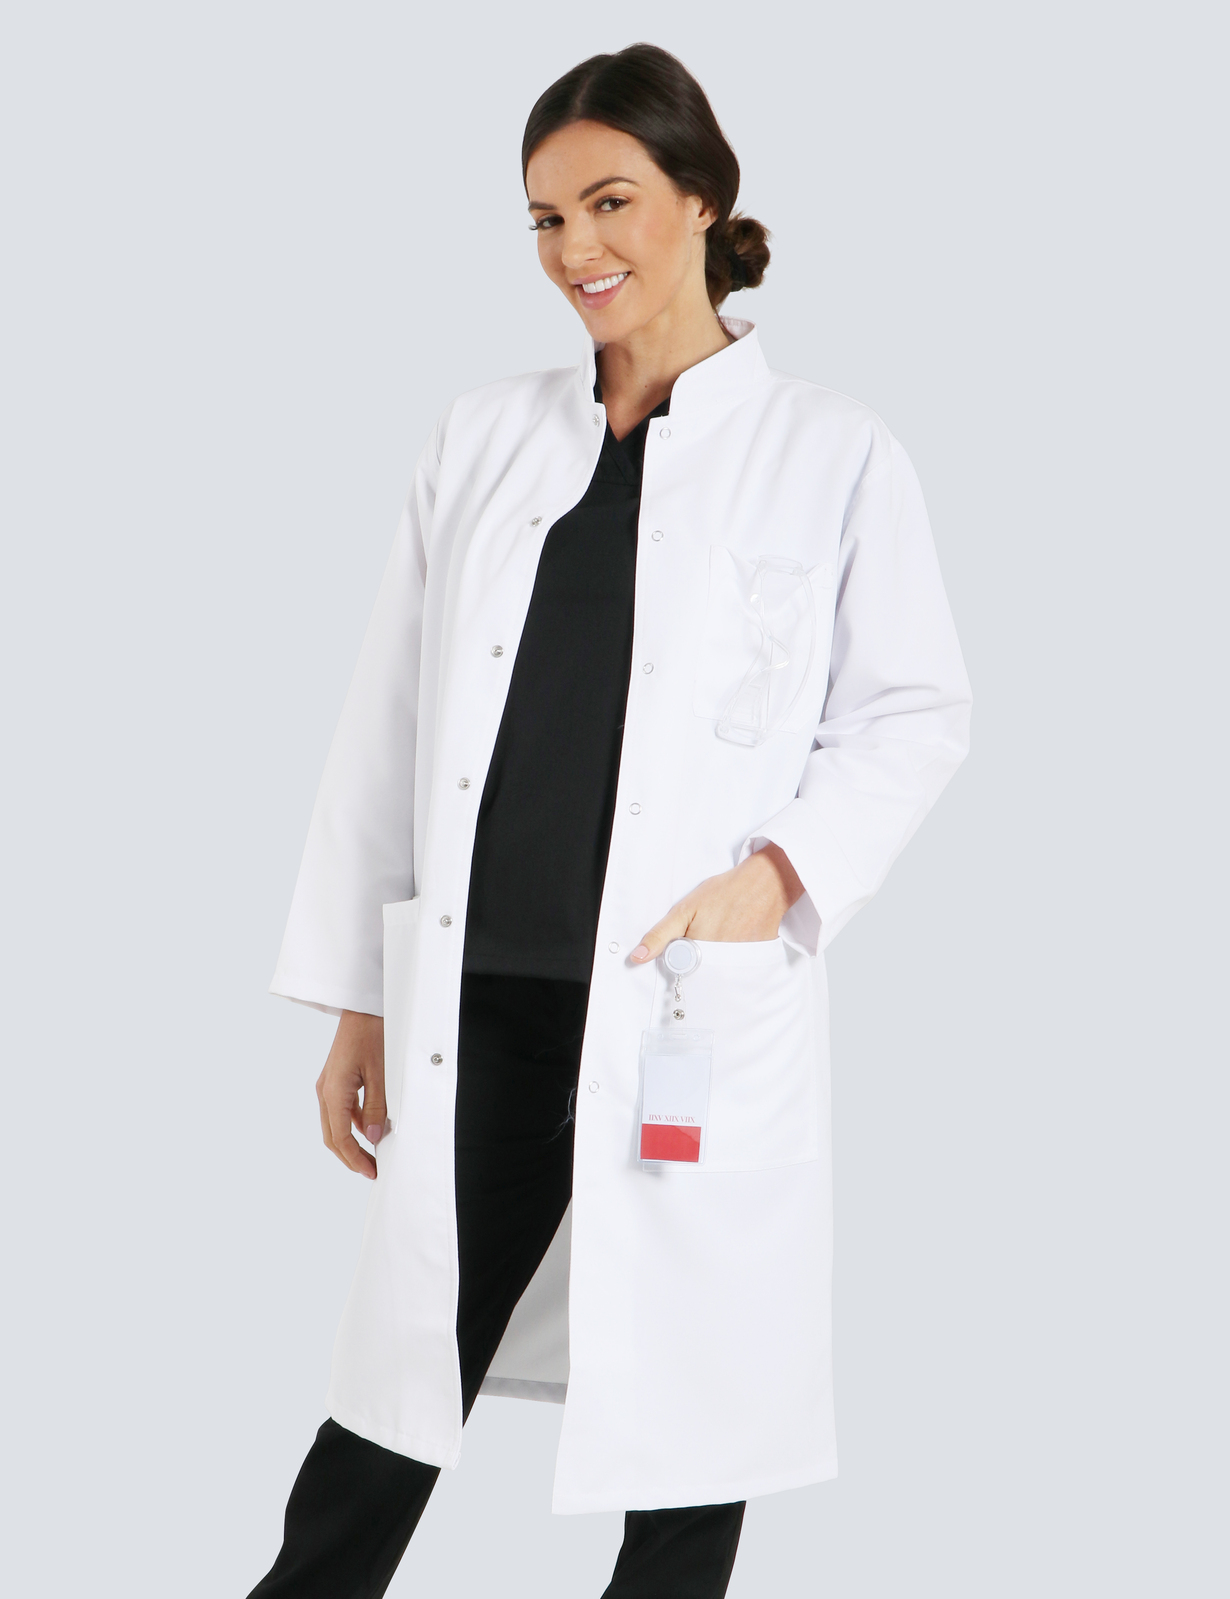 UQ Vets Gatton Consulting Military Style Lab Coat in White incl Logos